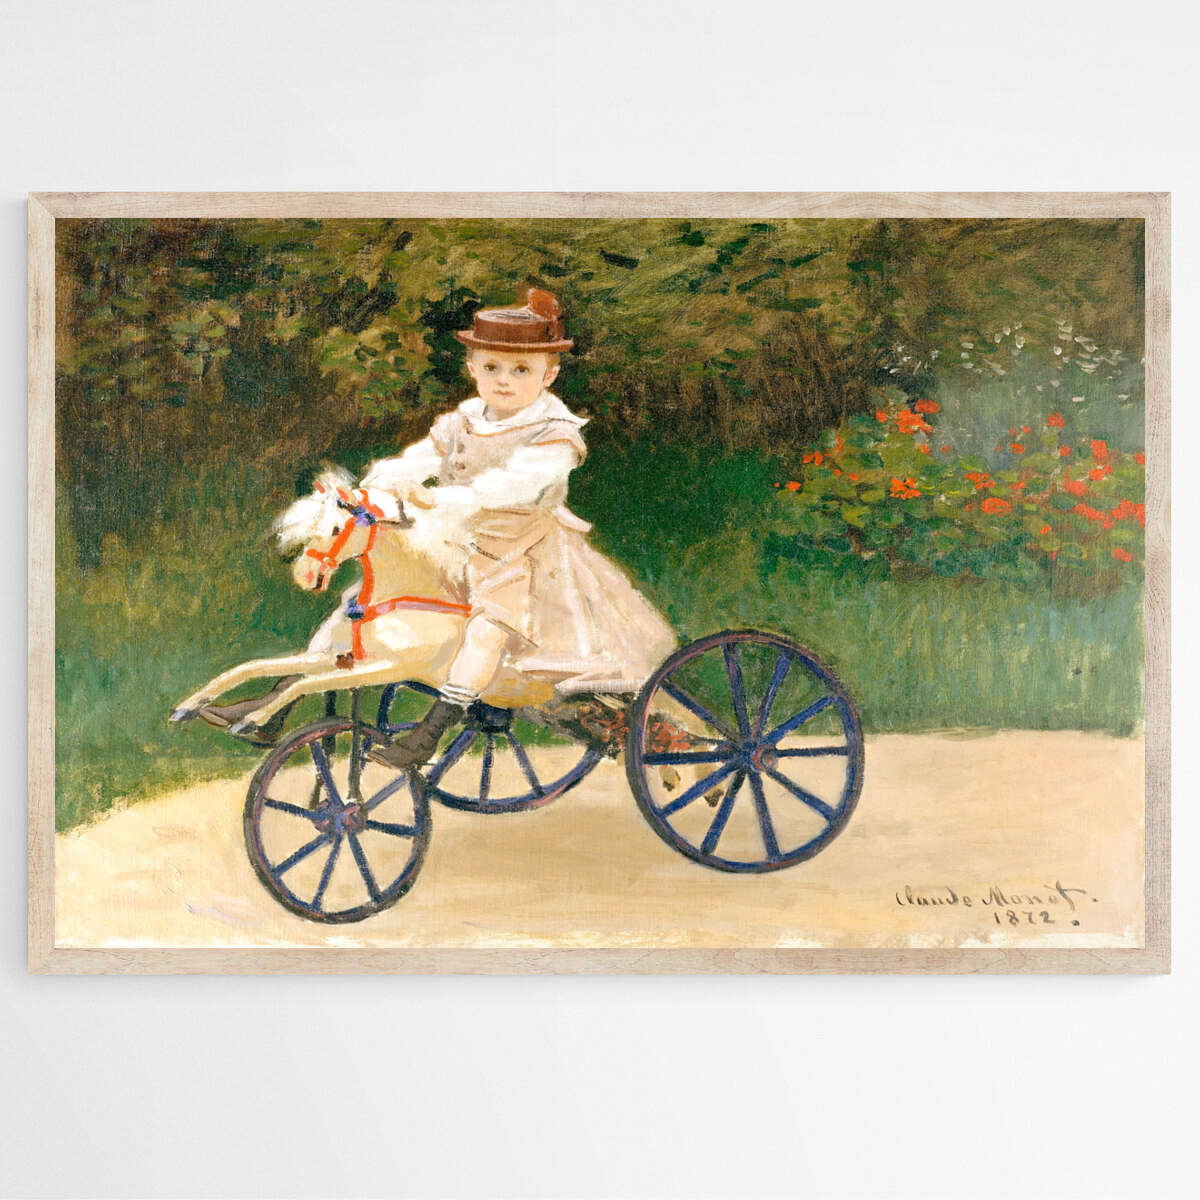 Jean Monet on His Hobby Horse by Claude Monet | Claude Monet Wall Art Prints - The Canvas Hive